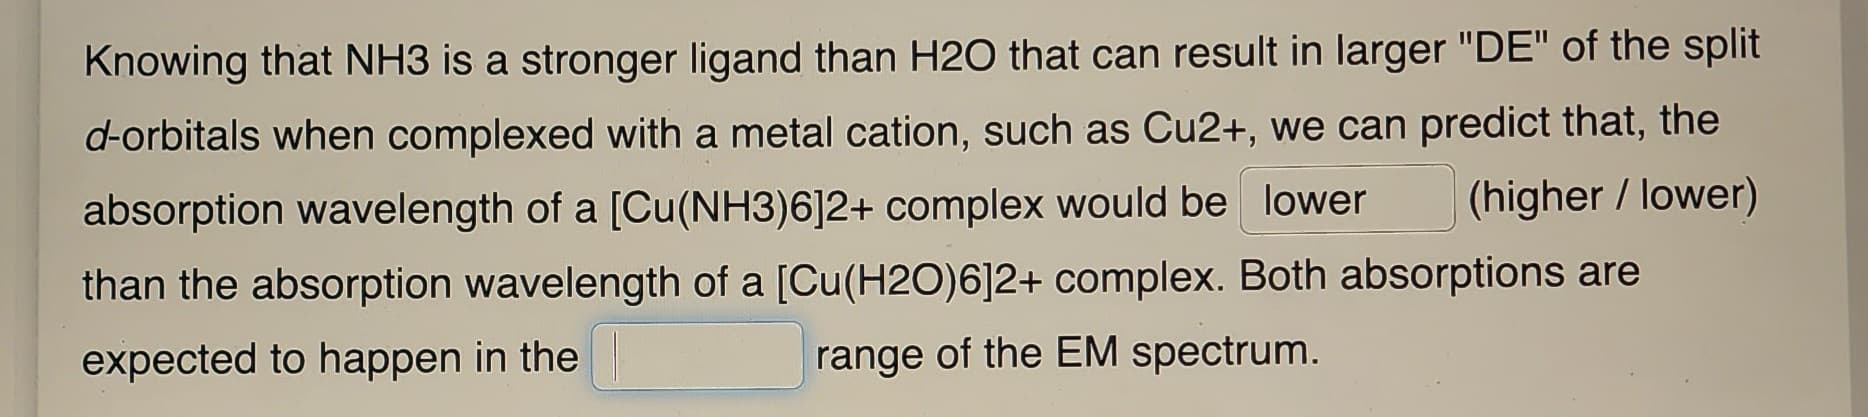 Knowing that NH3 is a stronger ligand than H2O that can result in larger "DE" of the split
d-orbitals when complexed with a metal cation, such as Cu2+, we can predict that, the
absorption wavelength of a [Cu(NH3)6]2+ complex would be lower (higher / lower)
than the absorption wavelength of a [Cu(H2O)6]2+ complex. Both absorptions are
expected to happen in the
range of the EM spectrum.